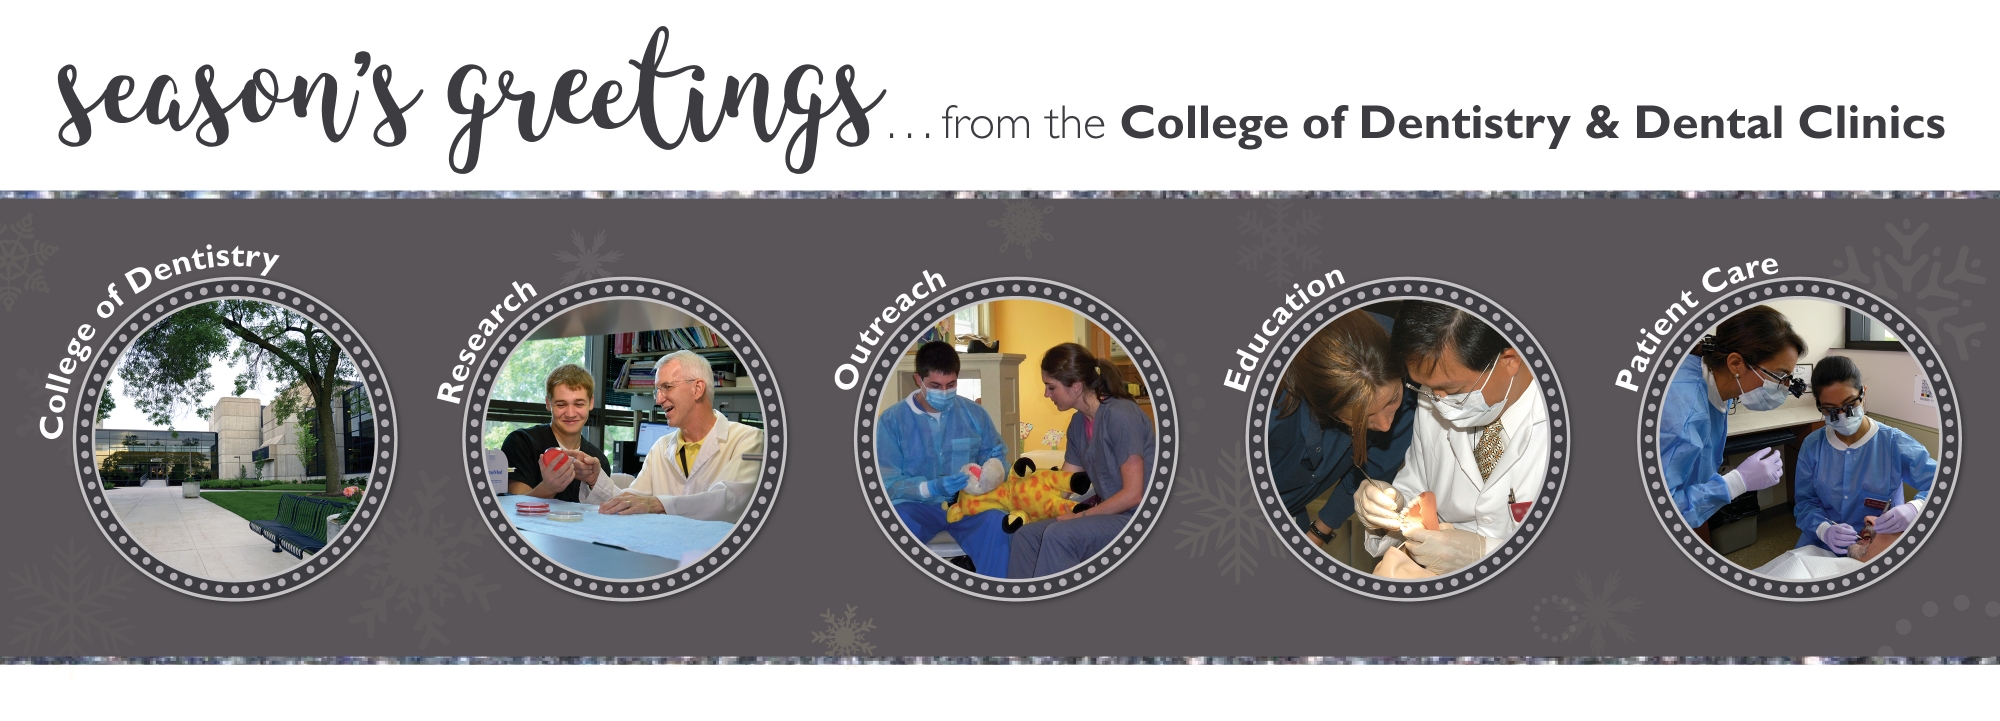 Seasons greetings from the College of Dentistry